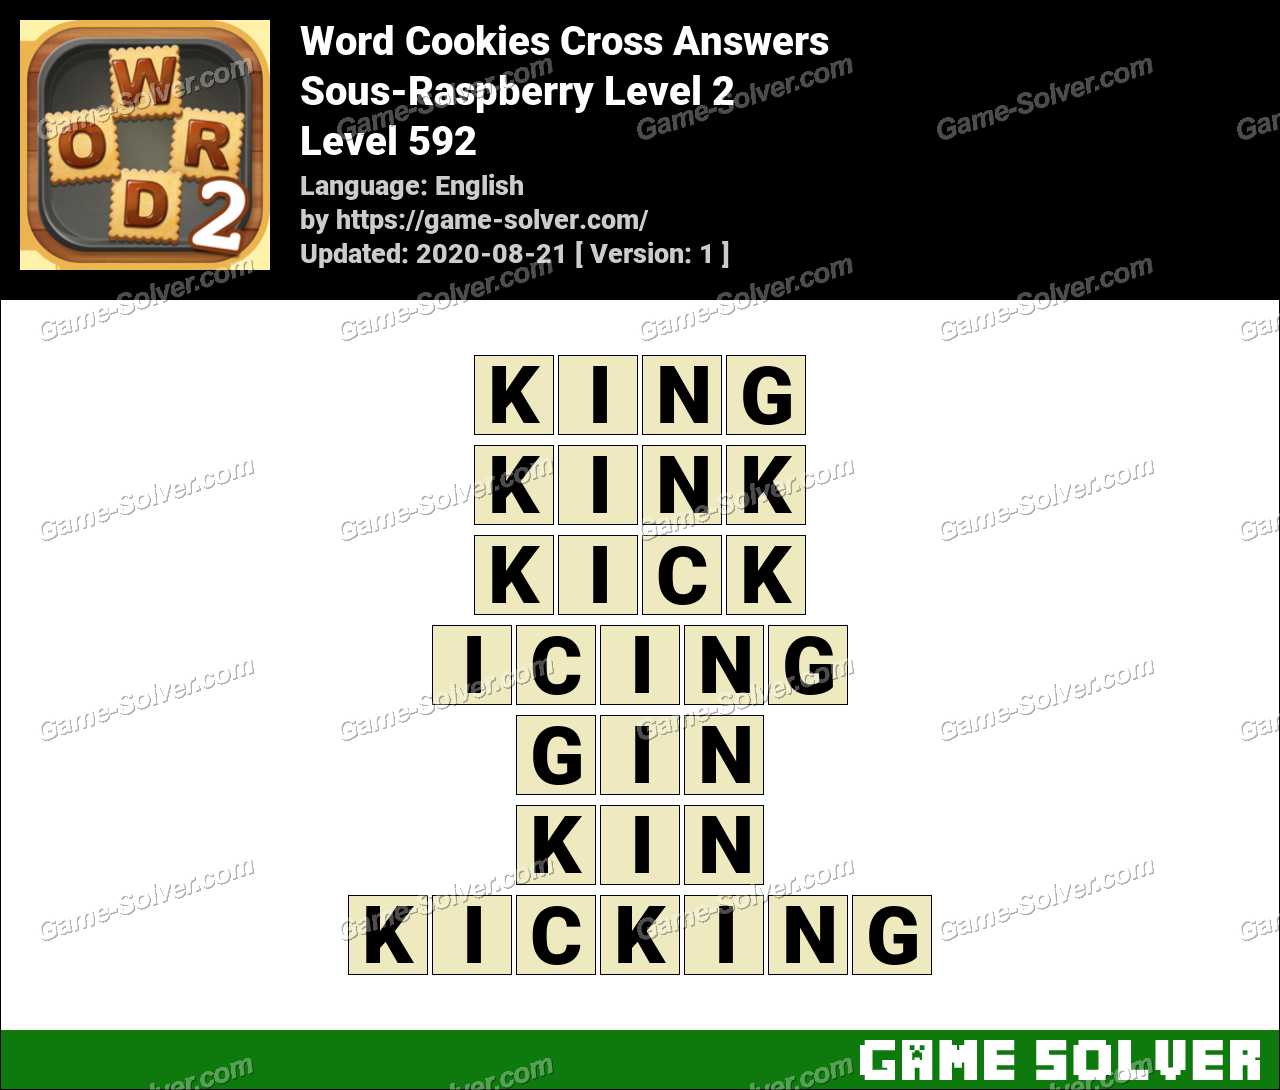 Word Cookies Cross Sous-Raspberry Level 2 Answers